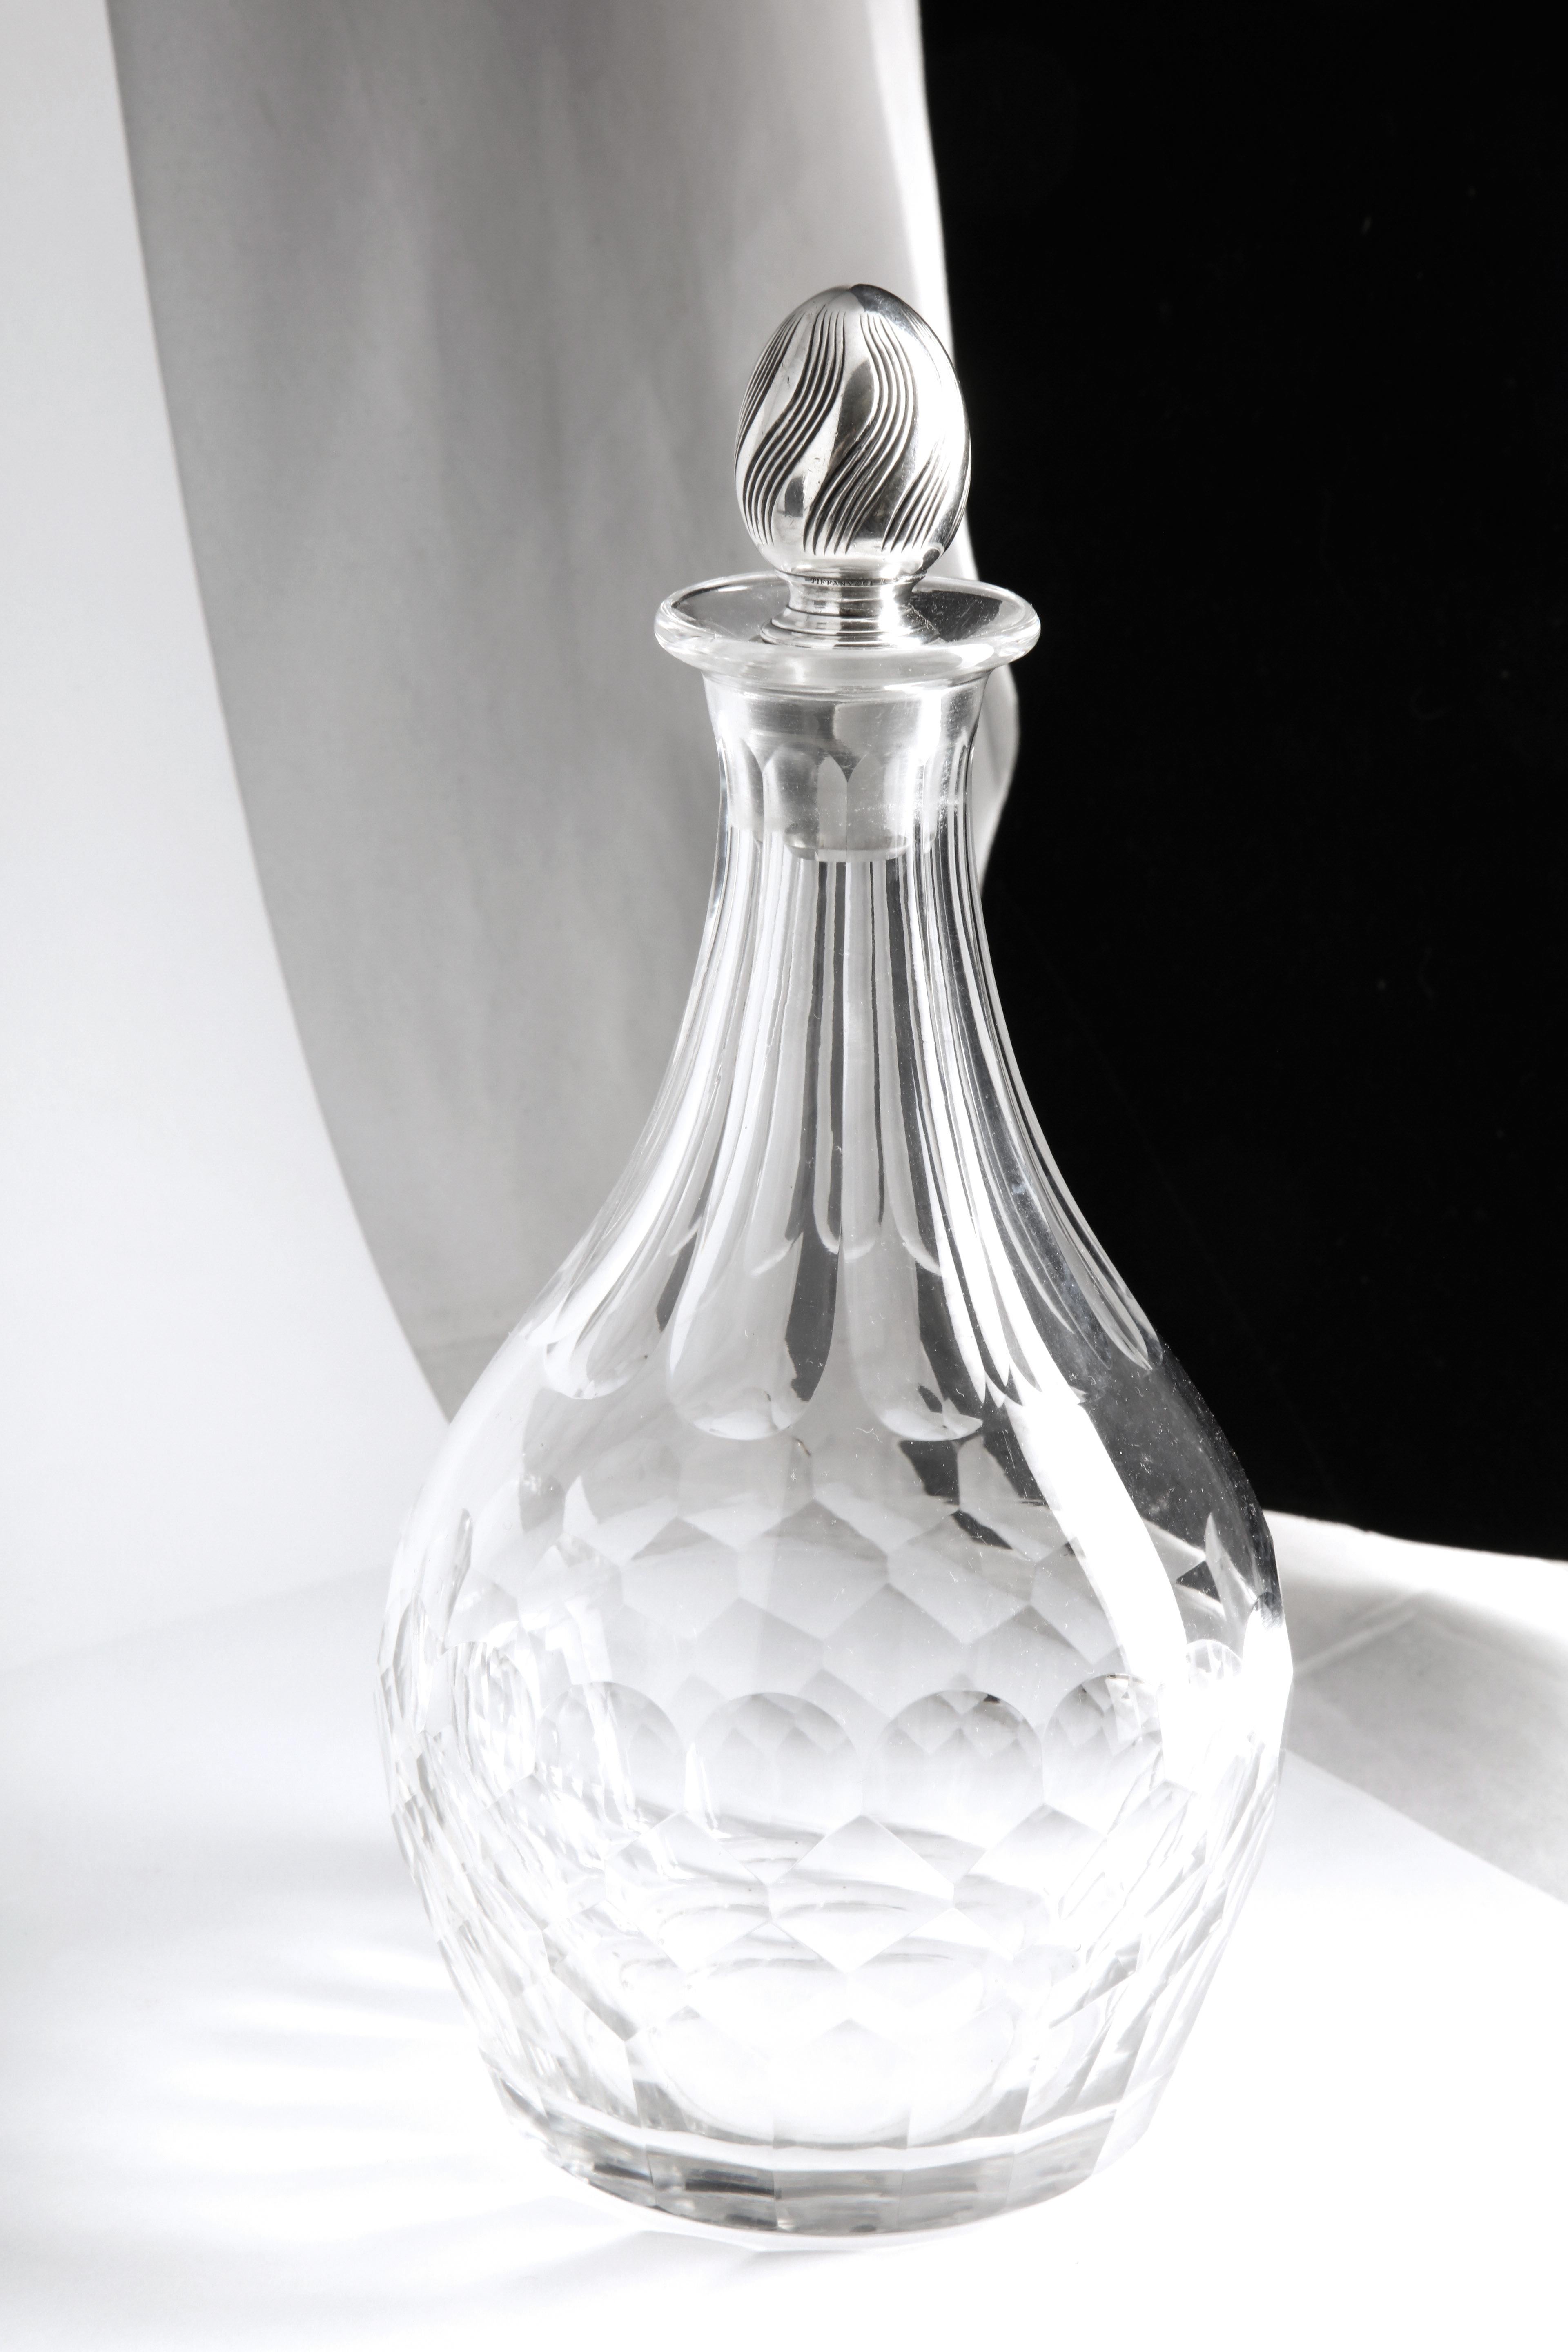 Tiffany and Co. Art Nouveau Sterling Silver, Mounted Decanter 1